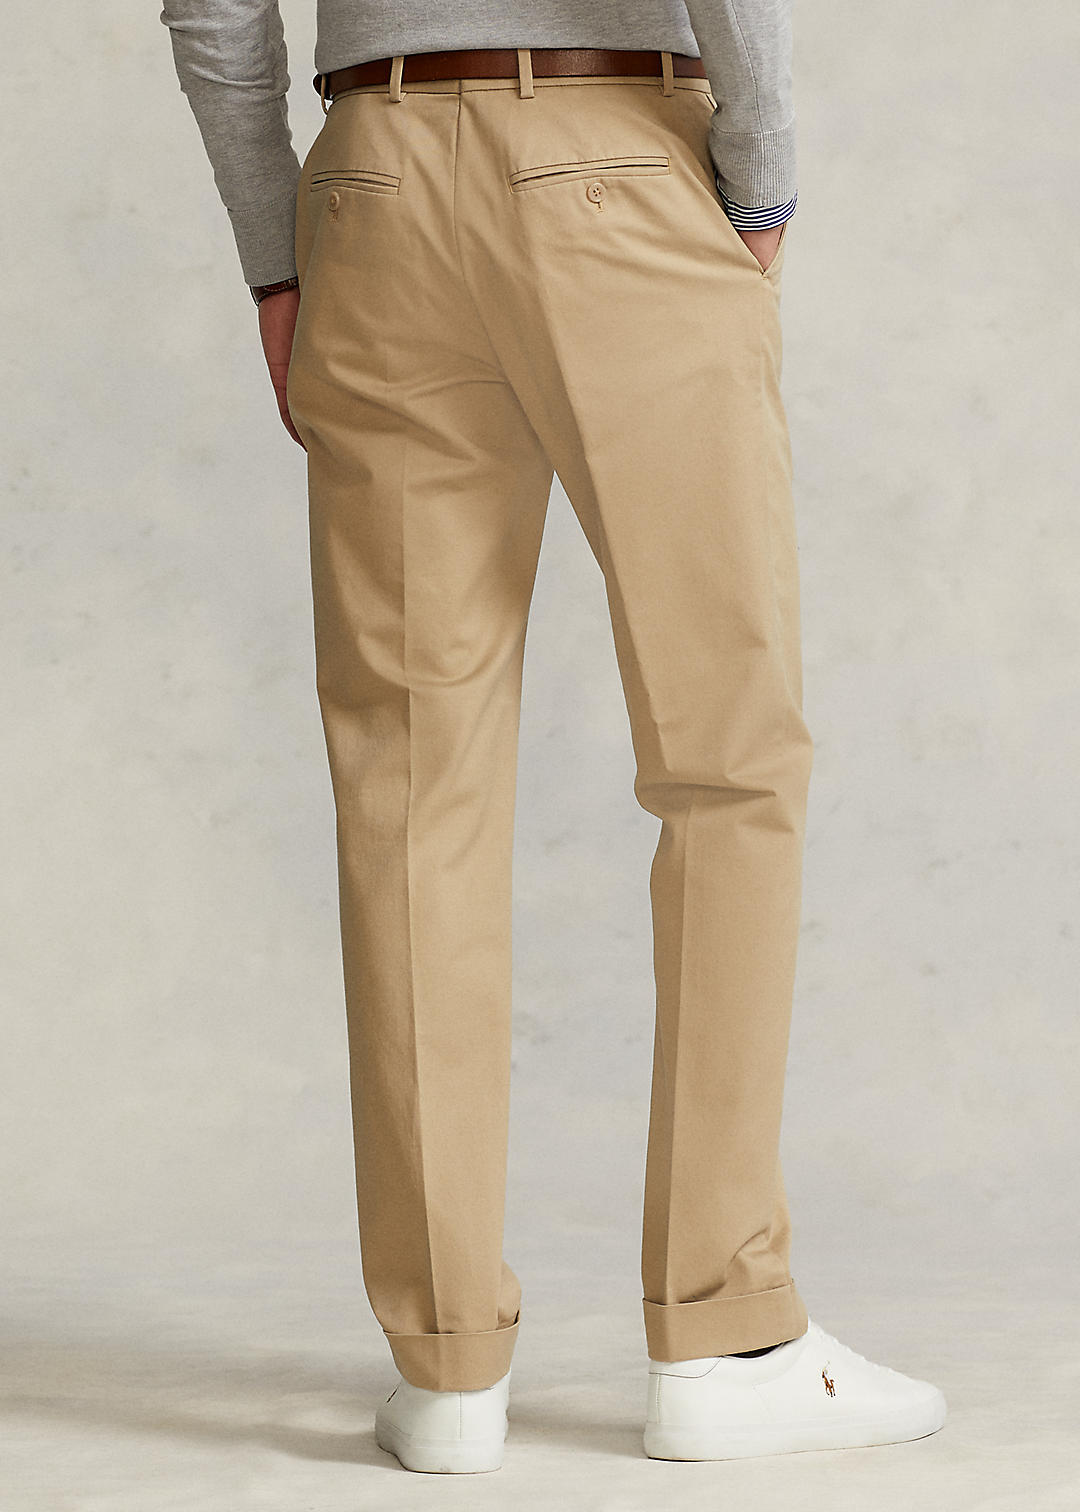 Polo Ralph Lauren Stretch Chino Suit Trouser 4